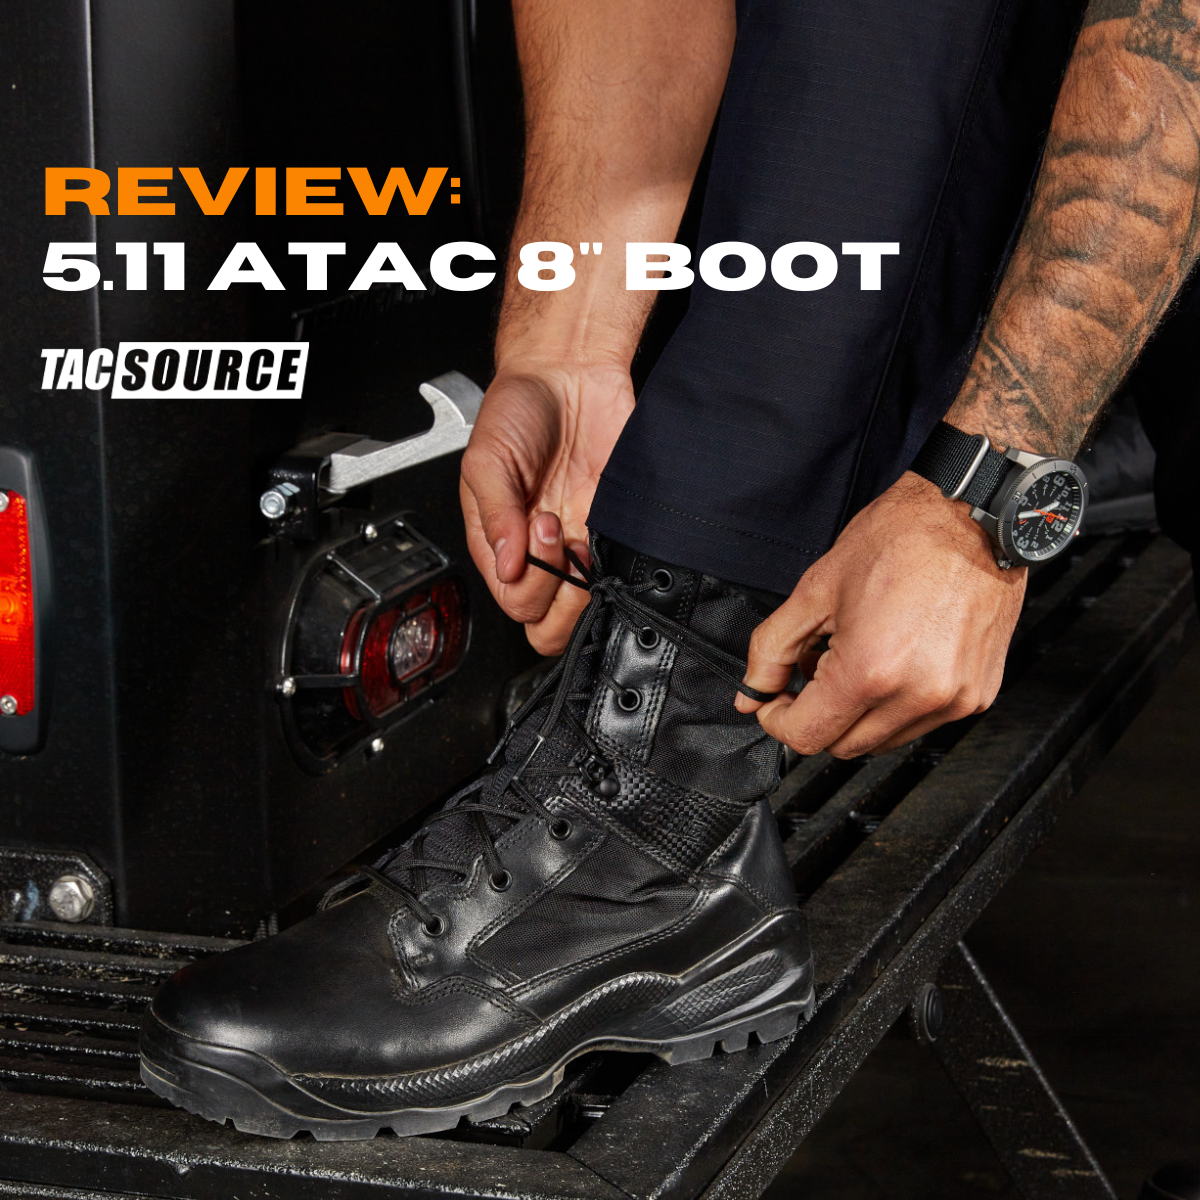 REVIEW: 5.11 Tactical ATAC 8" Boots